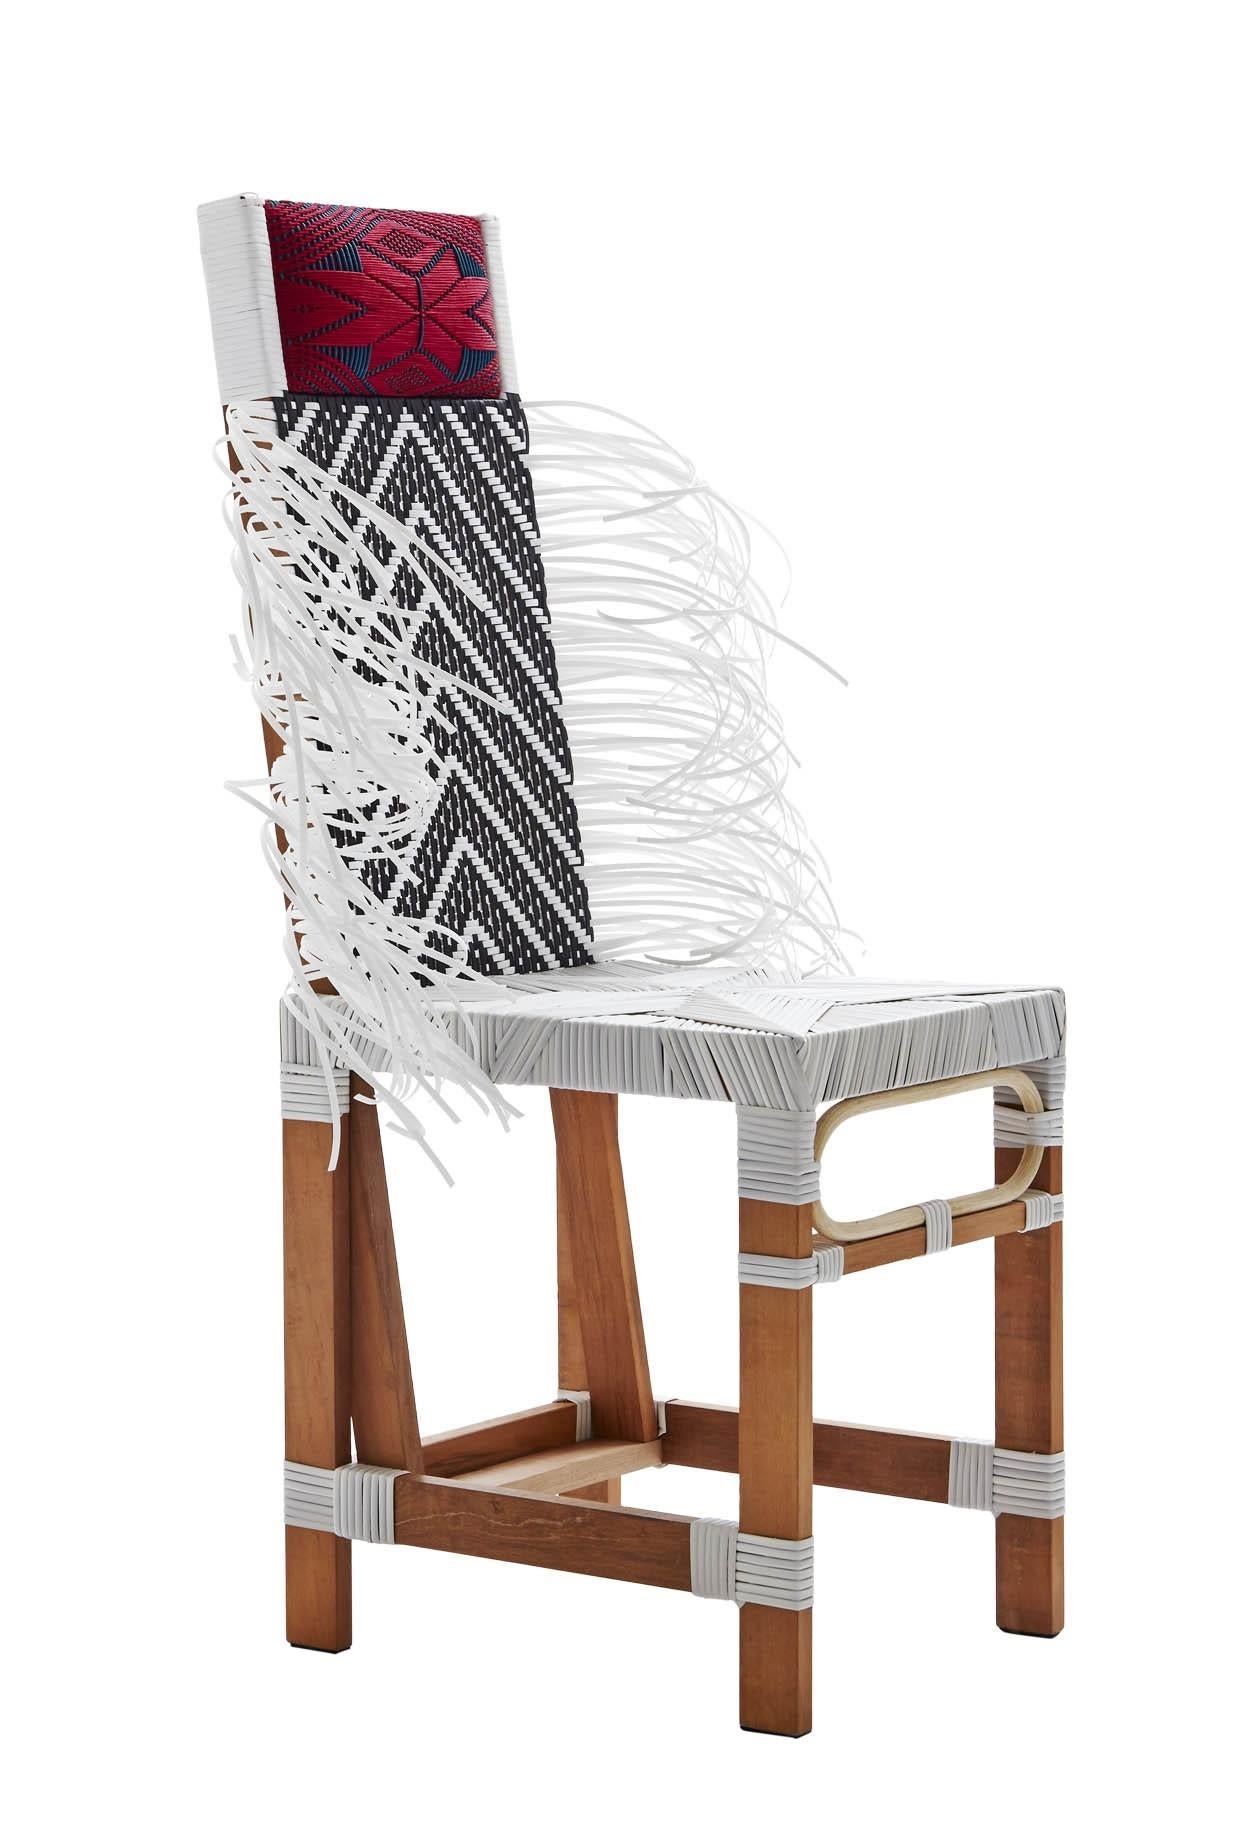 Rojjarnar was inspired by the vernacular language of simple chair construction. Hard and soft elements contrast each other in textures and designs. Kitt.Ta.Khon draws from traditional North Eastern textile pattern, wicker work and objects. For